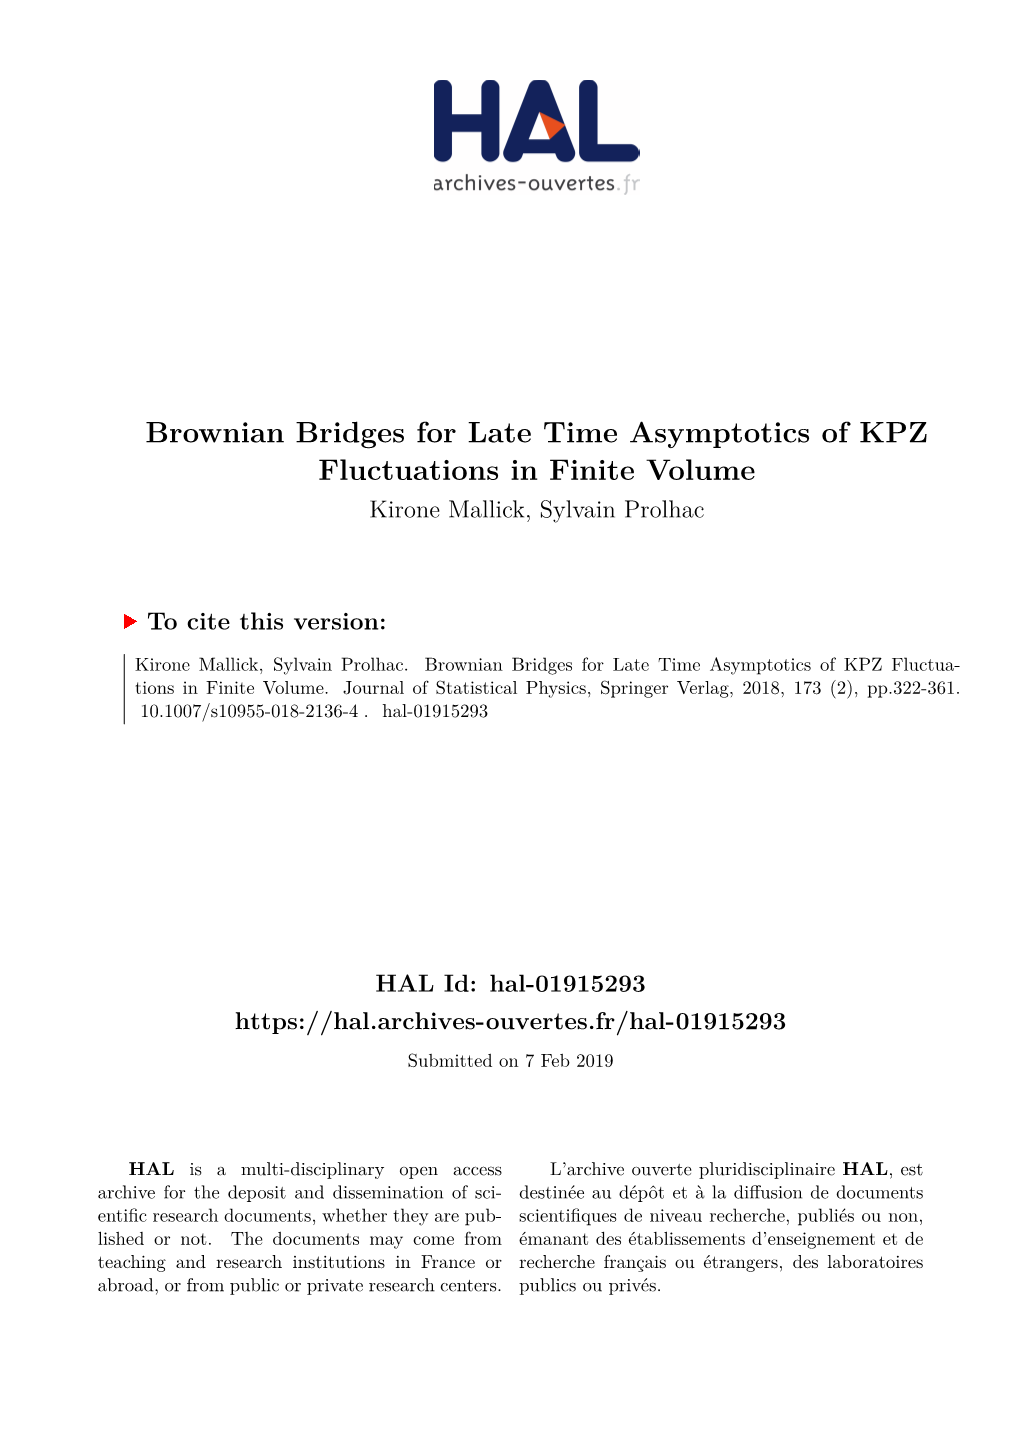 Brownian Bridges for Late Time Asymptotics of KPZ Fluctuations in Finite Volume Kirone Mallick, Sylvain Prolhac